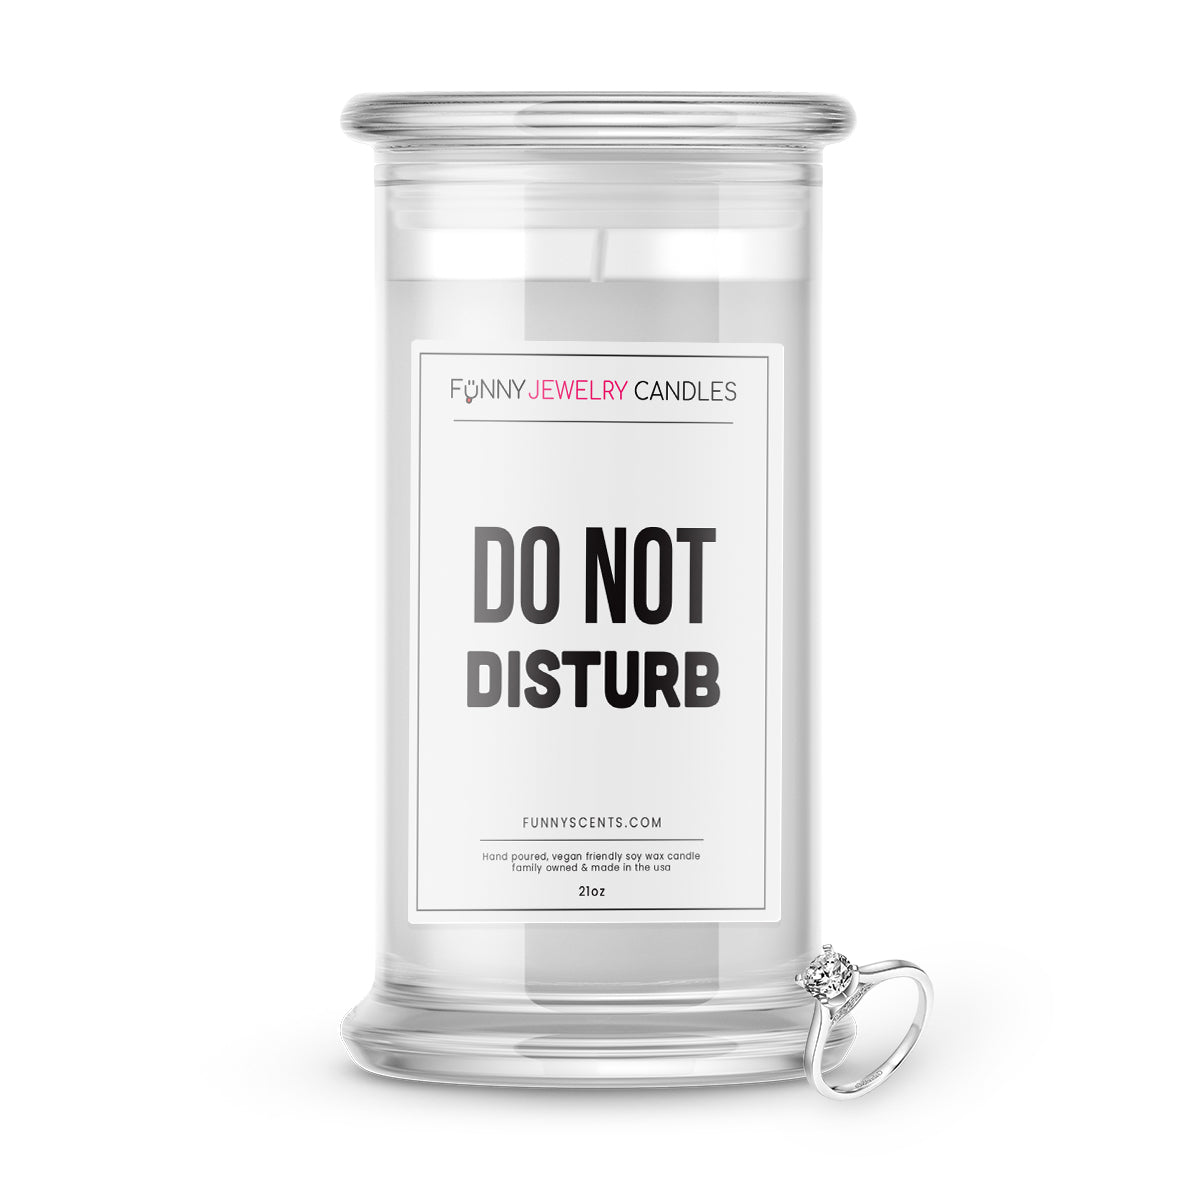 Do Not Disturb Jewelry Funny Candles